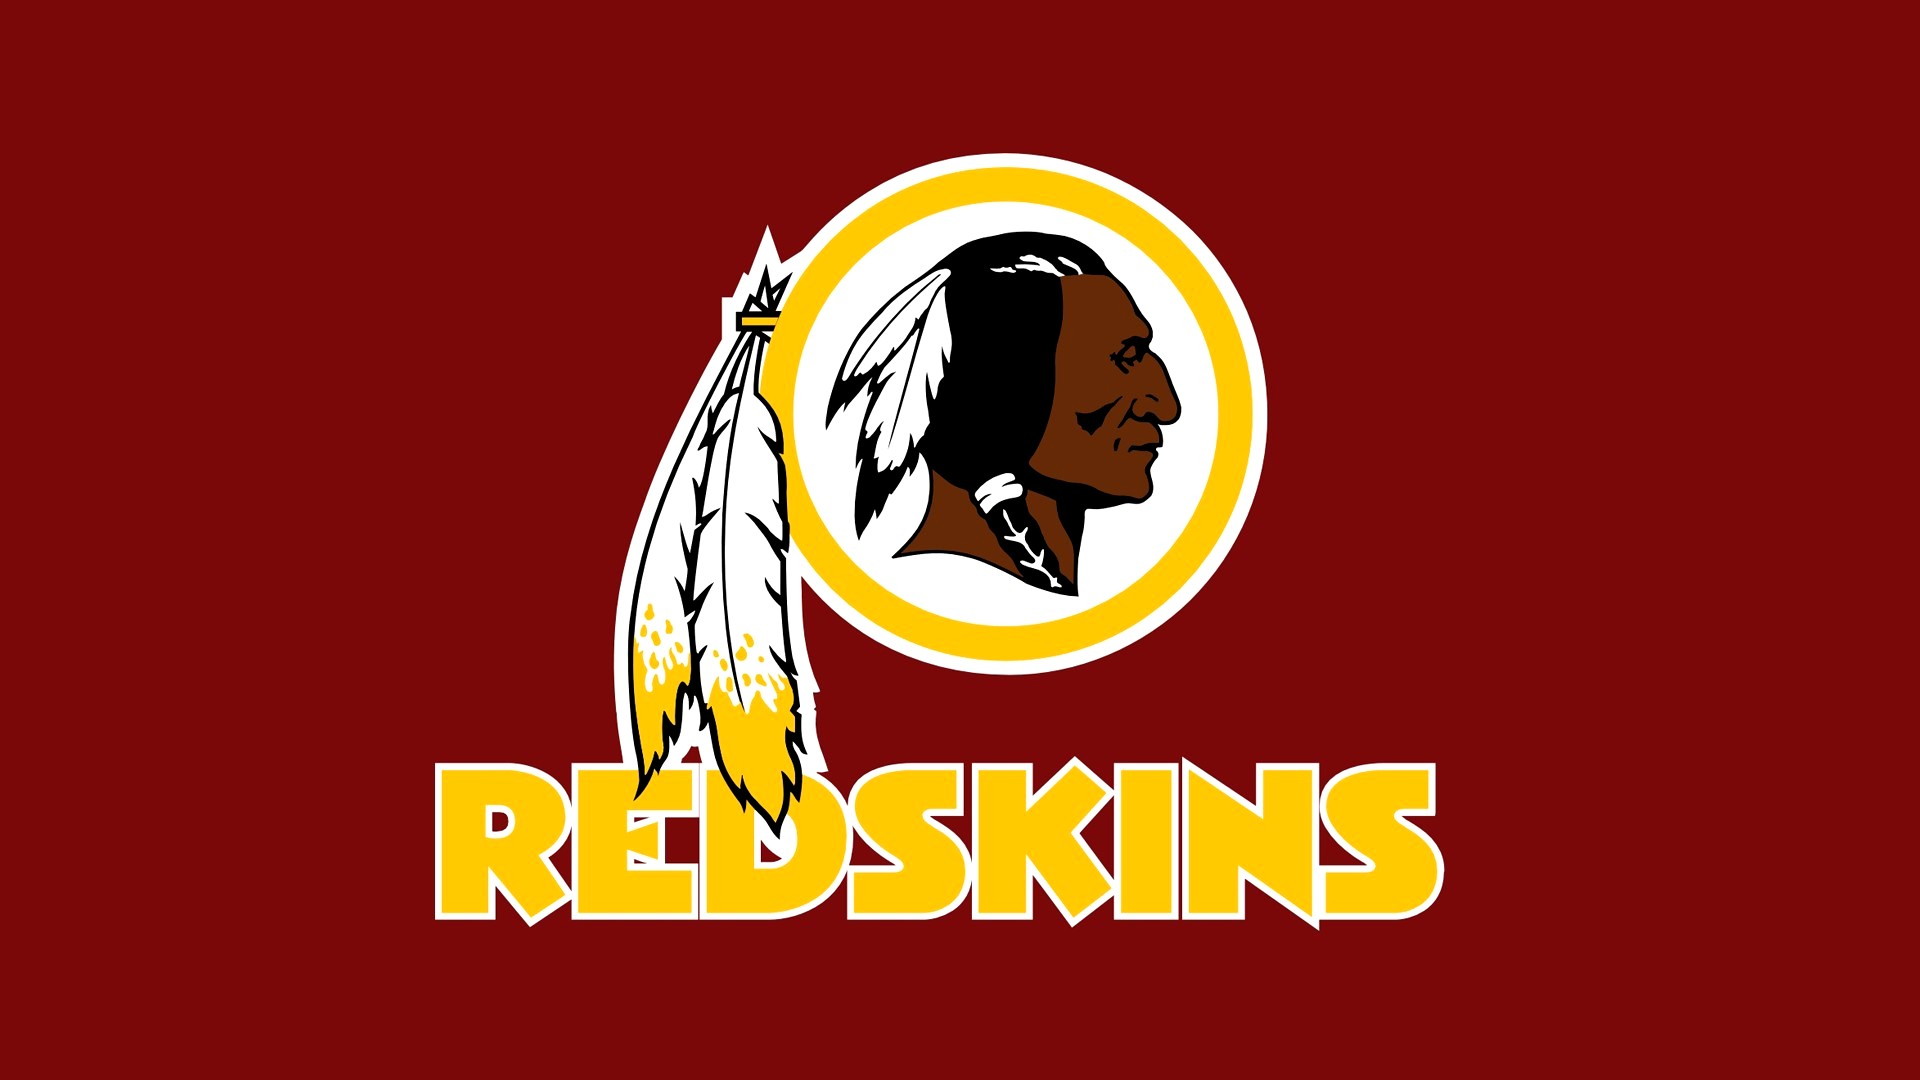 Wallpaper of Washington Redskins with high-resolution 1920x1080 pixel. You can use and set as wallpaper for Notebook Screensavers, Mac Wallpapers, Mobile Home Screen, iPhone or Android Phones Lock Screen